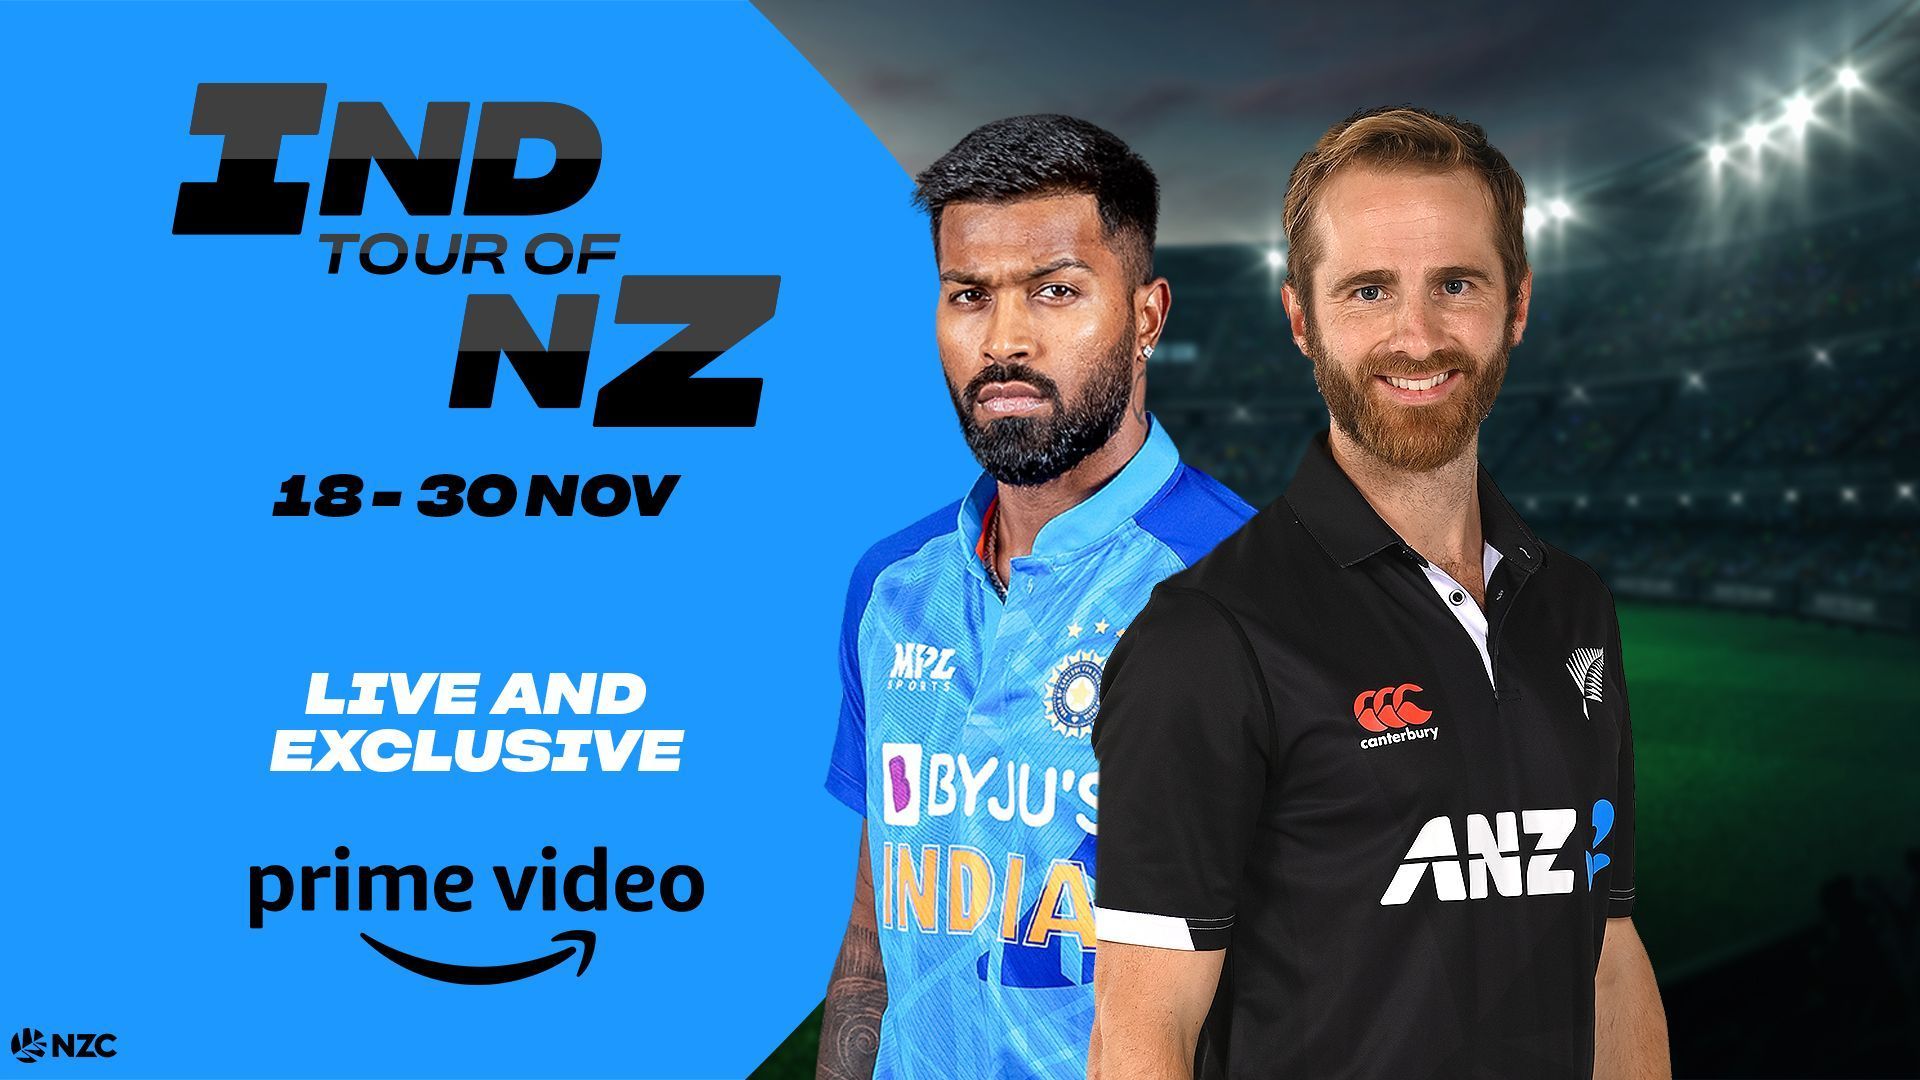 India tour of New Zealand Live and Exclusive on Prime Video